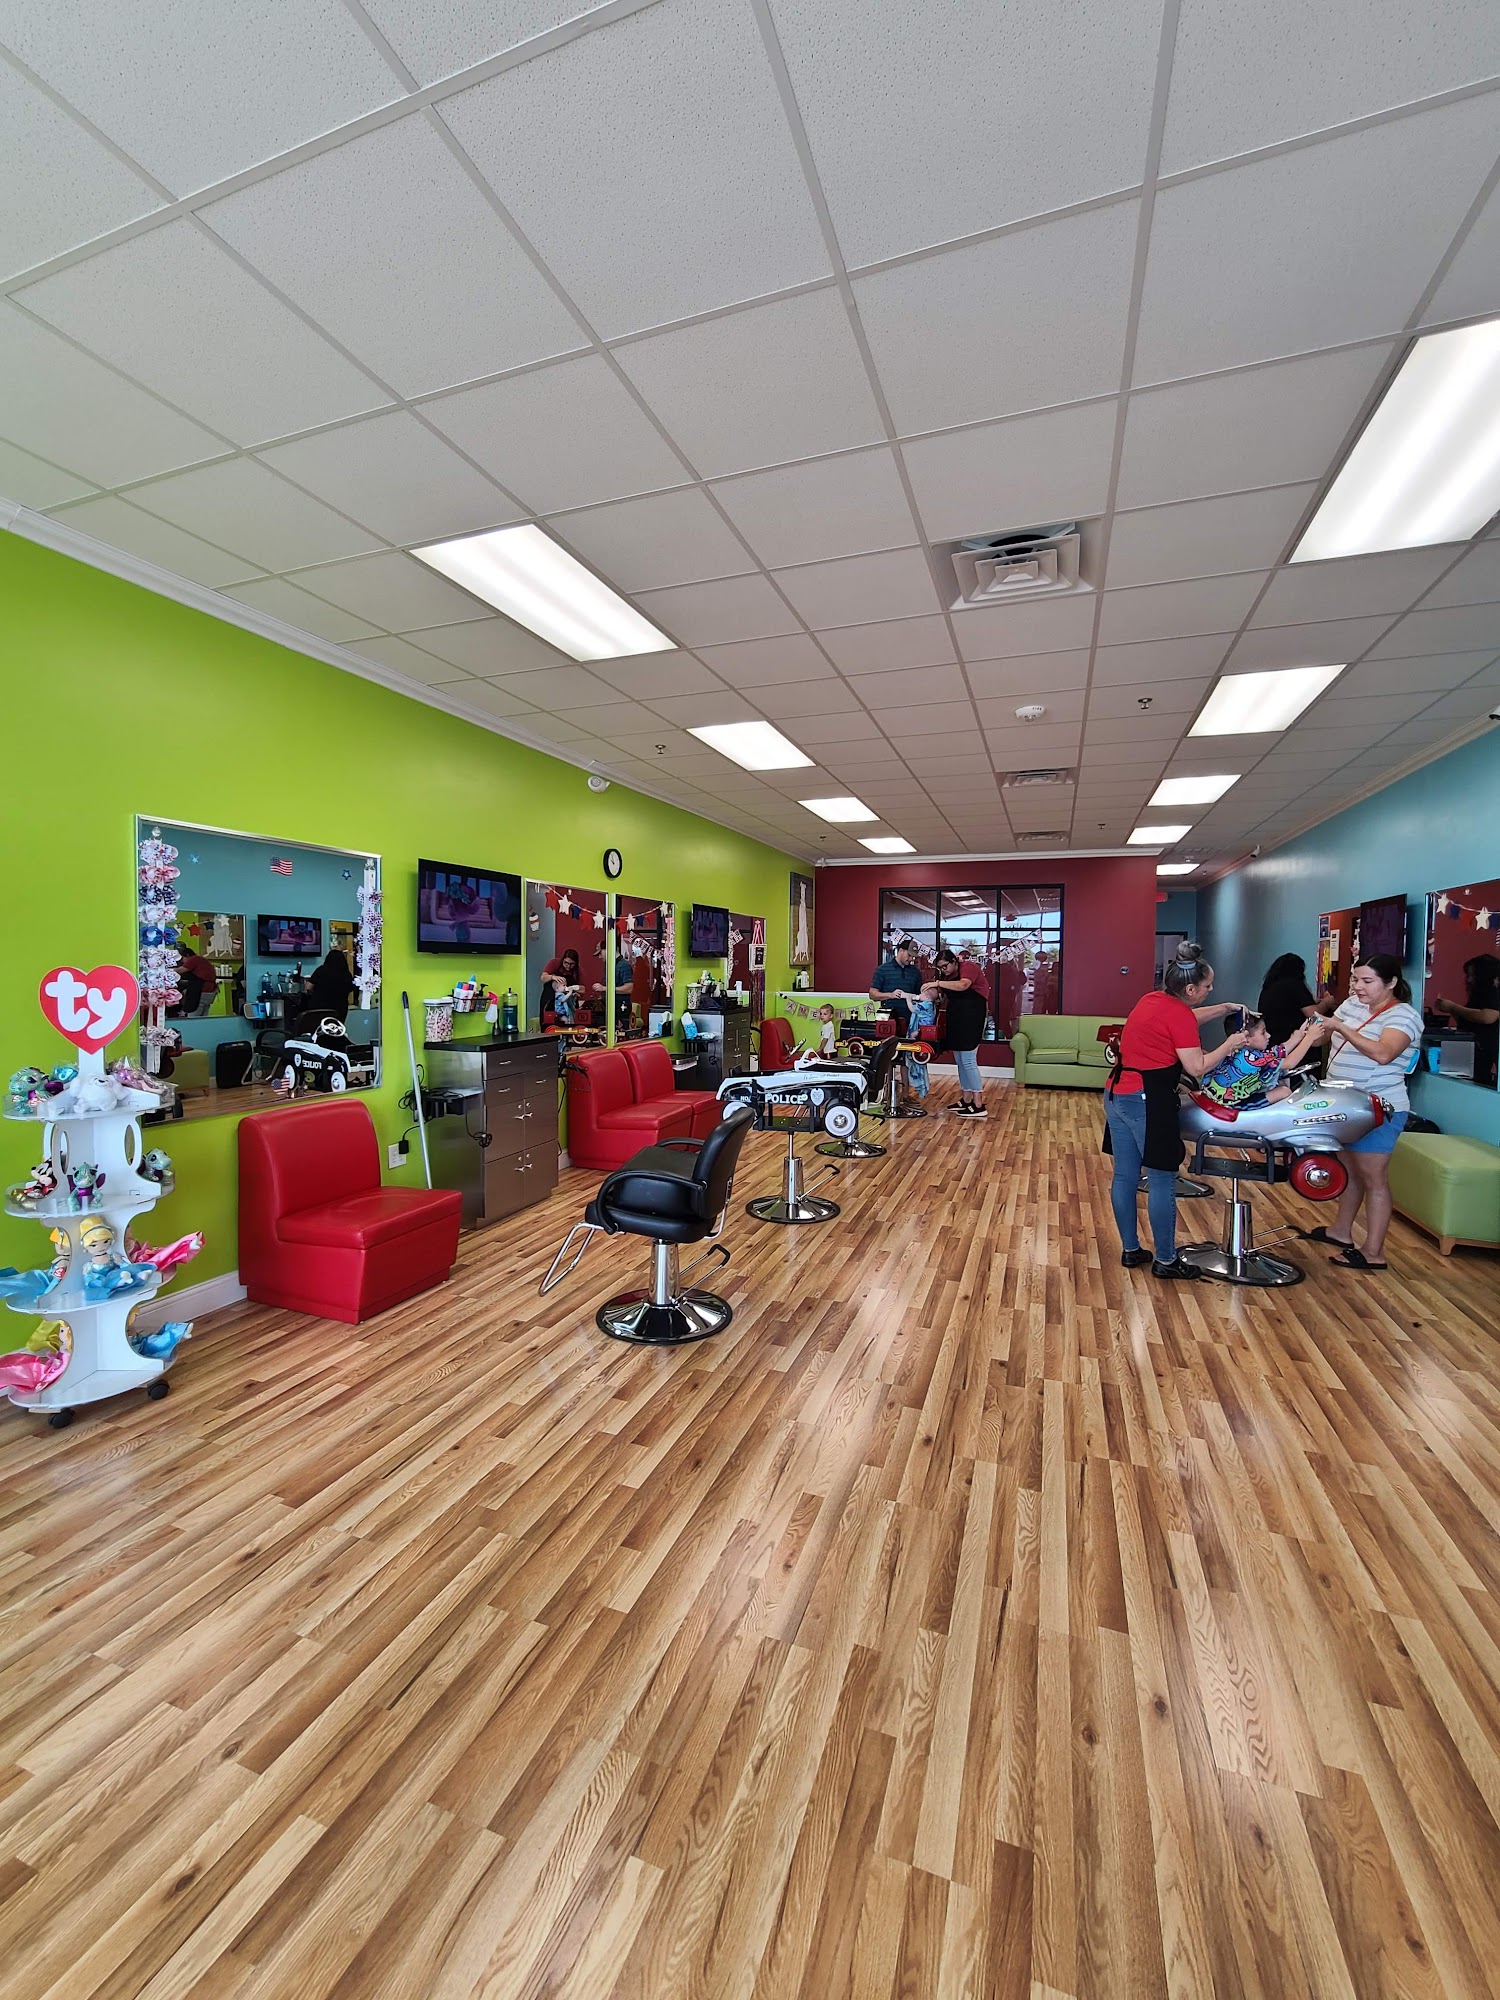 Pigtails & Crewcuts: Haircuts for Kids - Prosper, TX